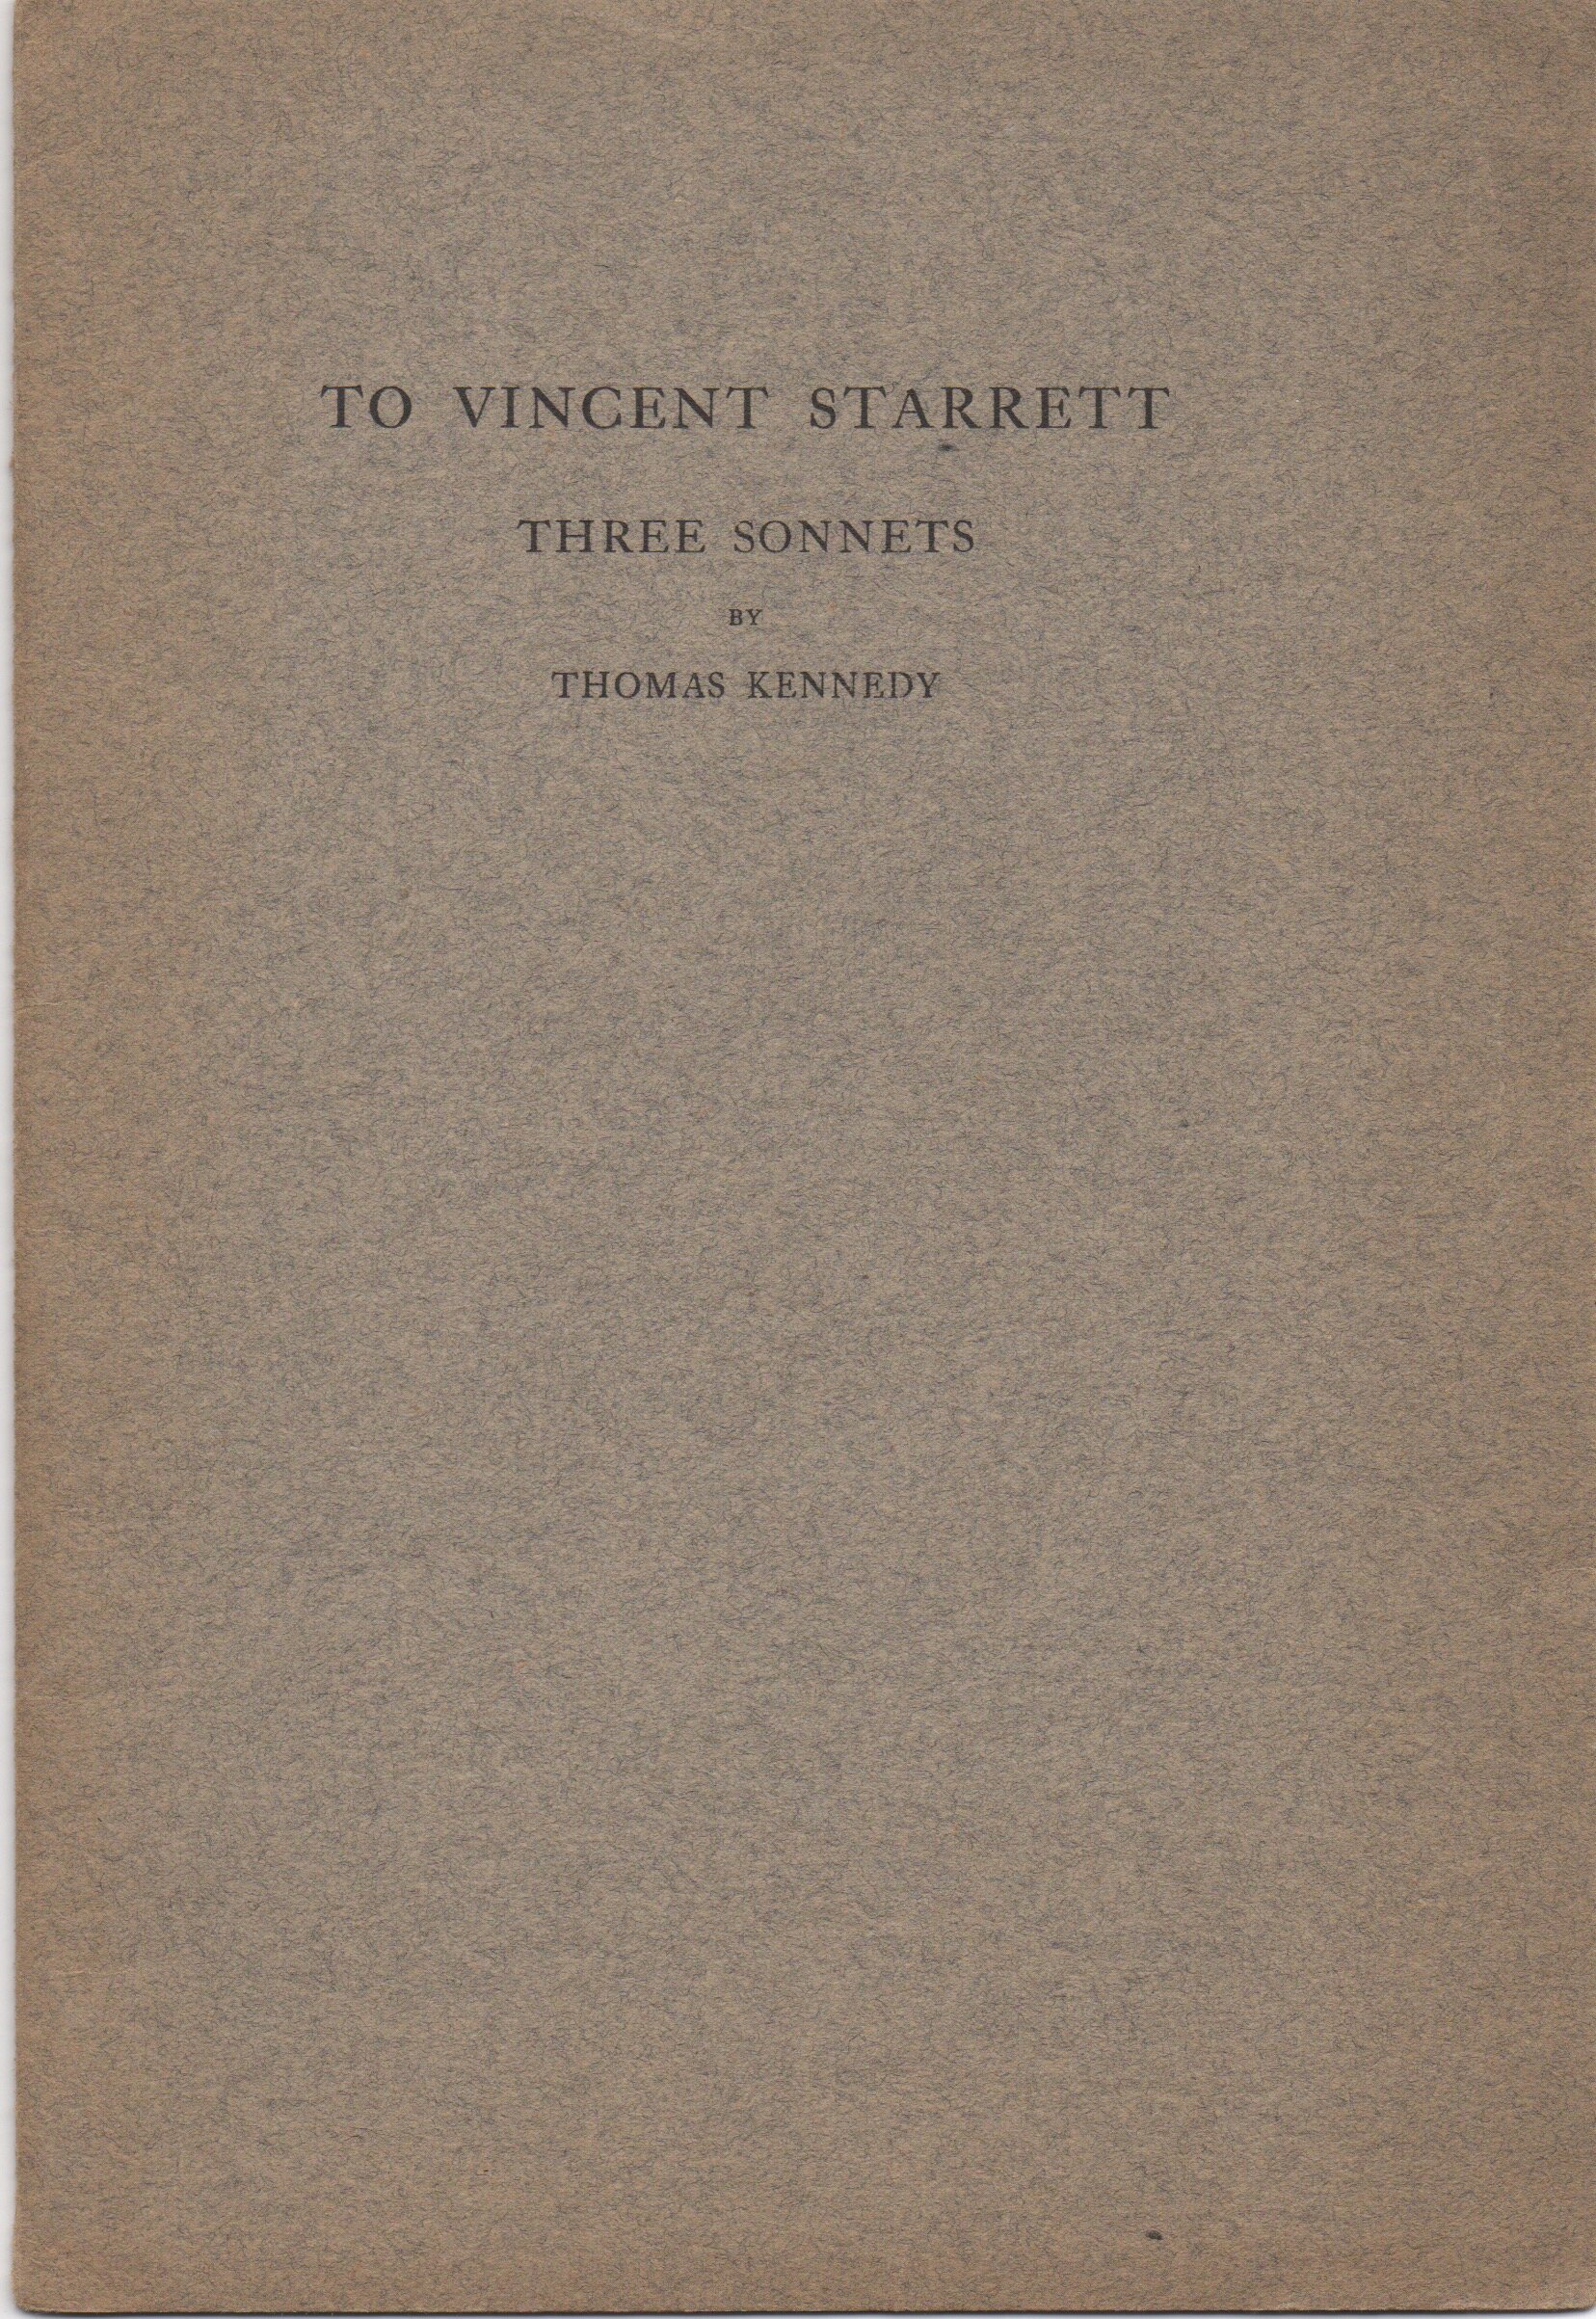  Thomas Kennedy was a Chicago poet and close friend of Starrett’s. In 1923, Starrett dedicated a book of poetry to Kennedy. 